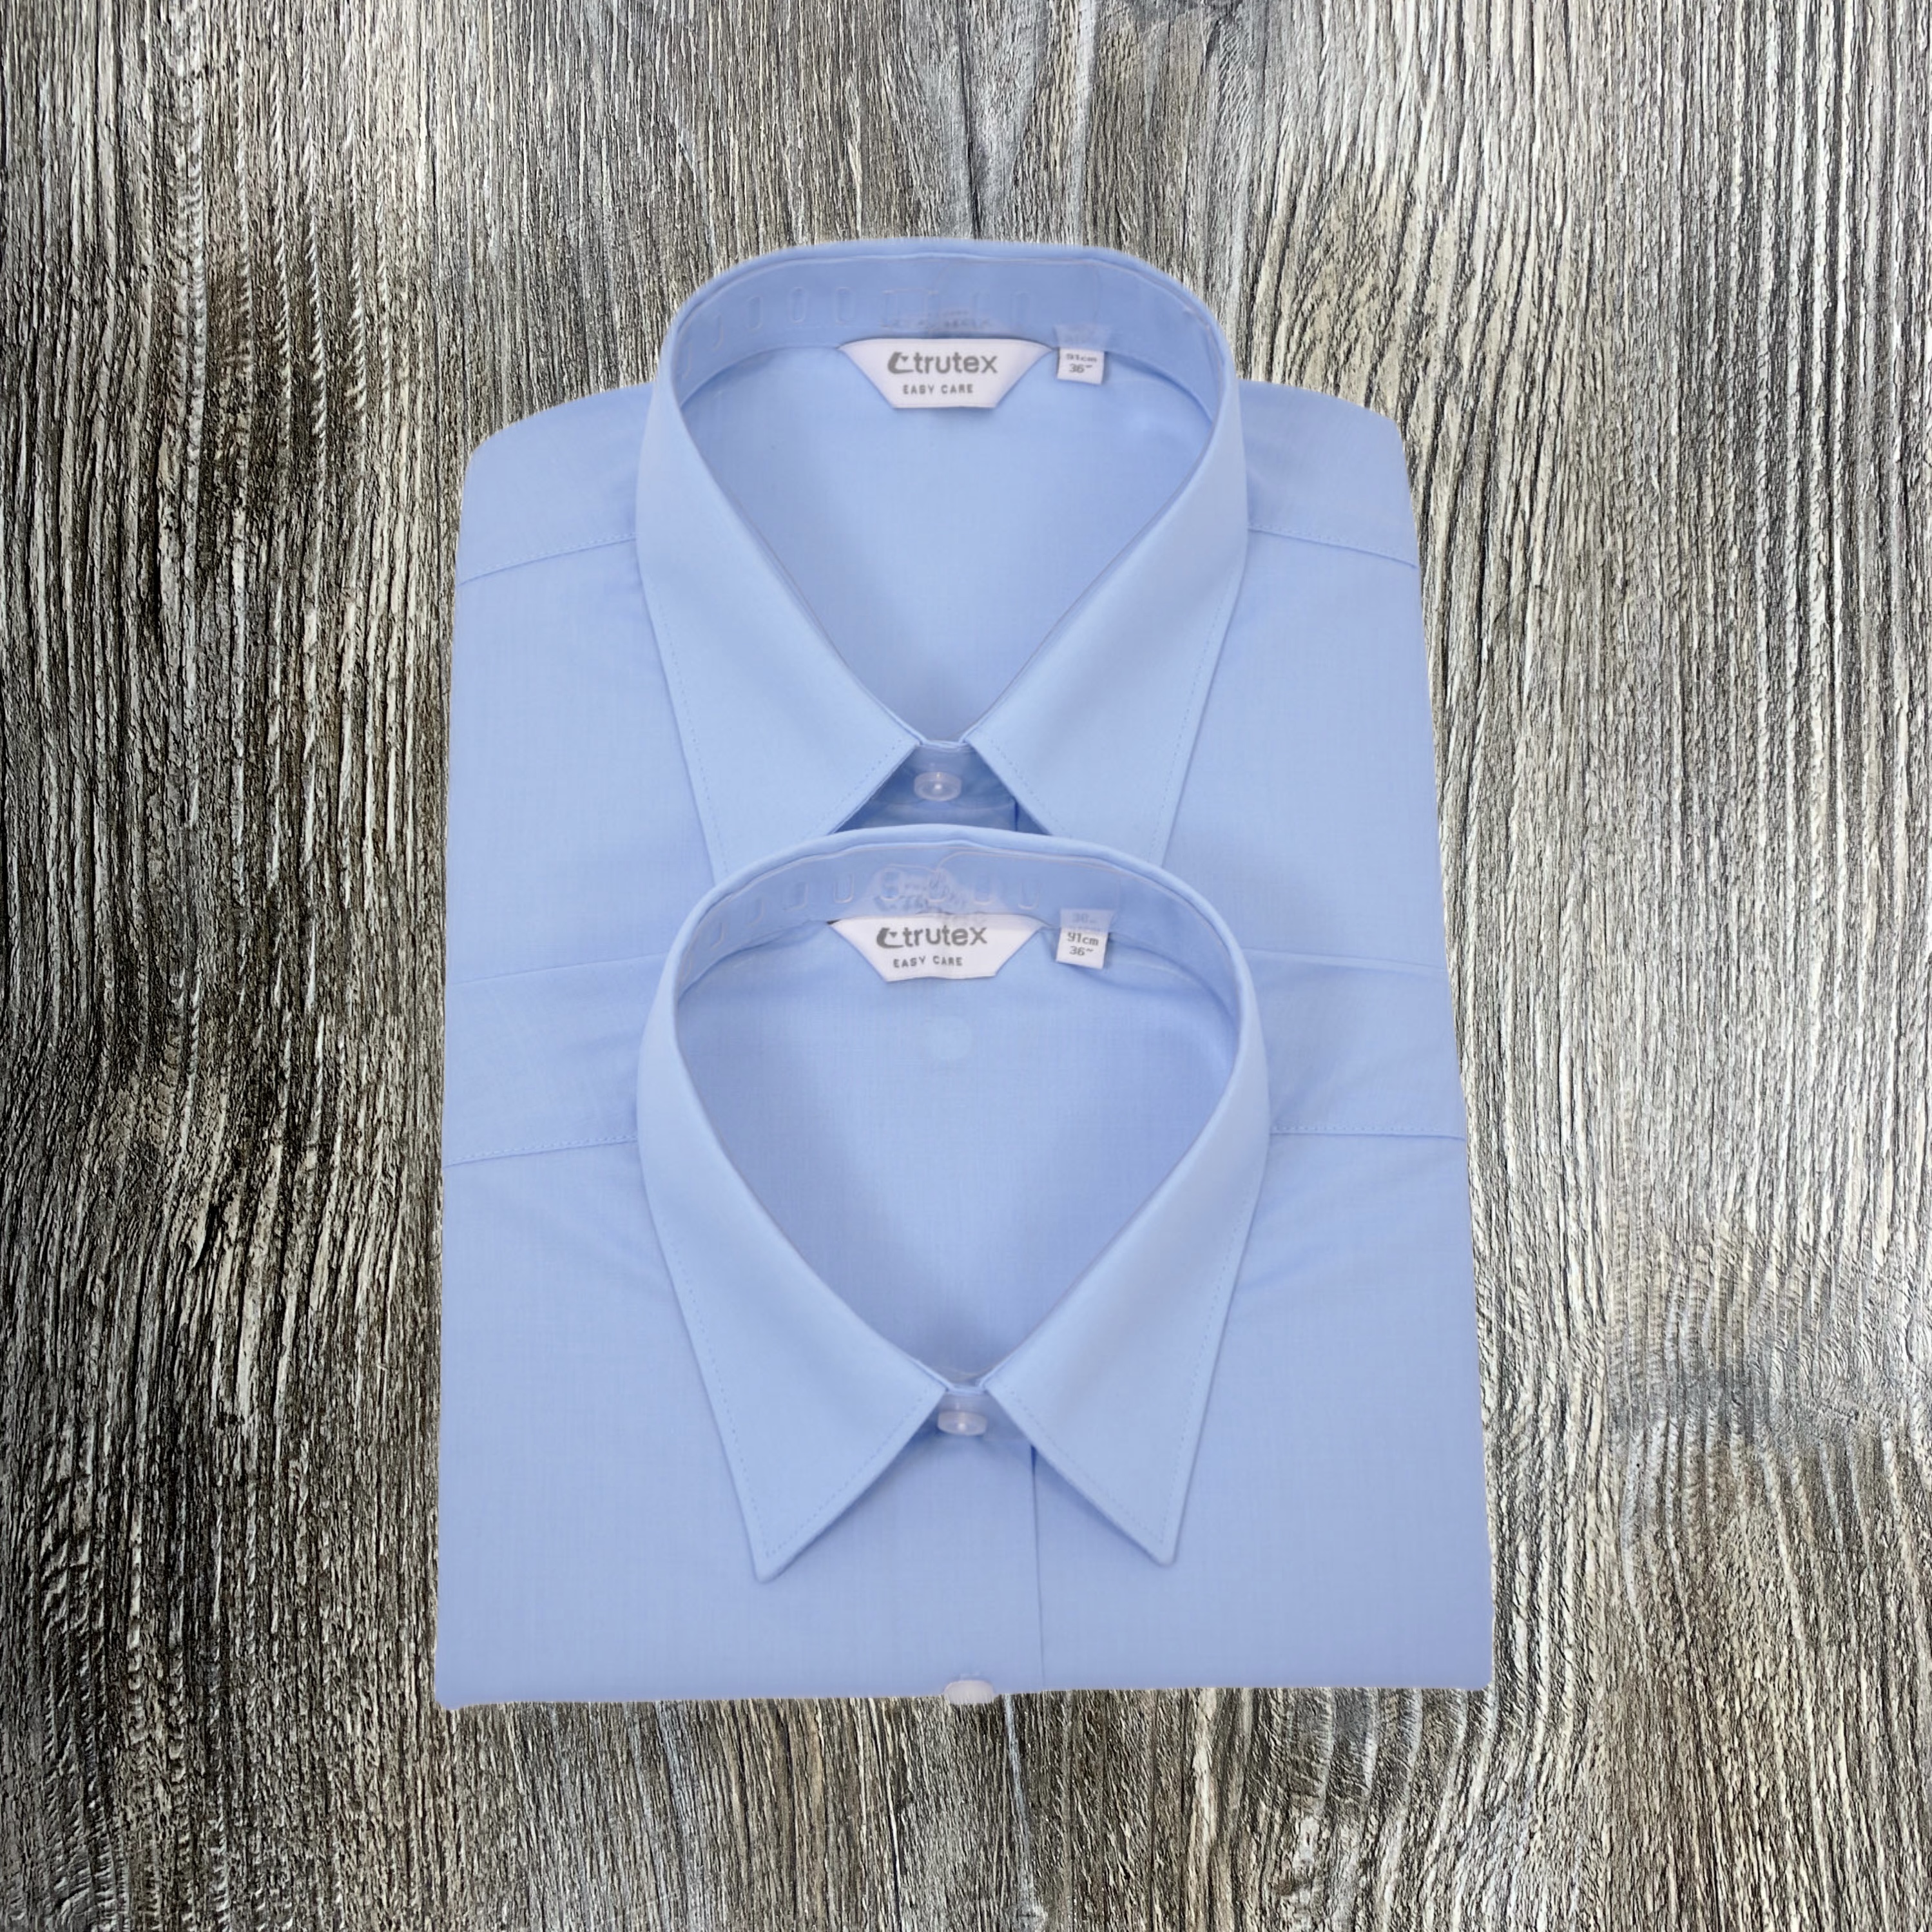  Blue Blouses - Trutex Twin Pack